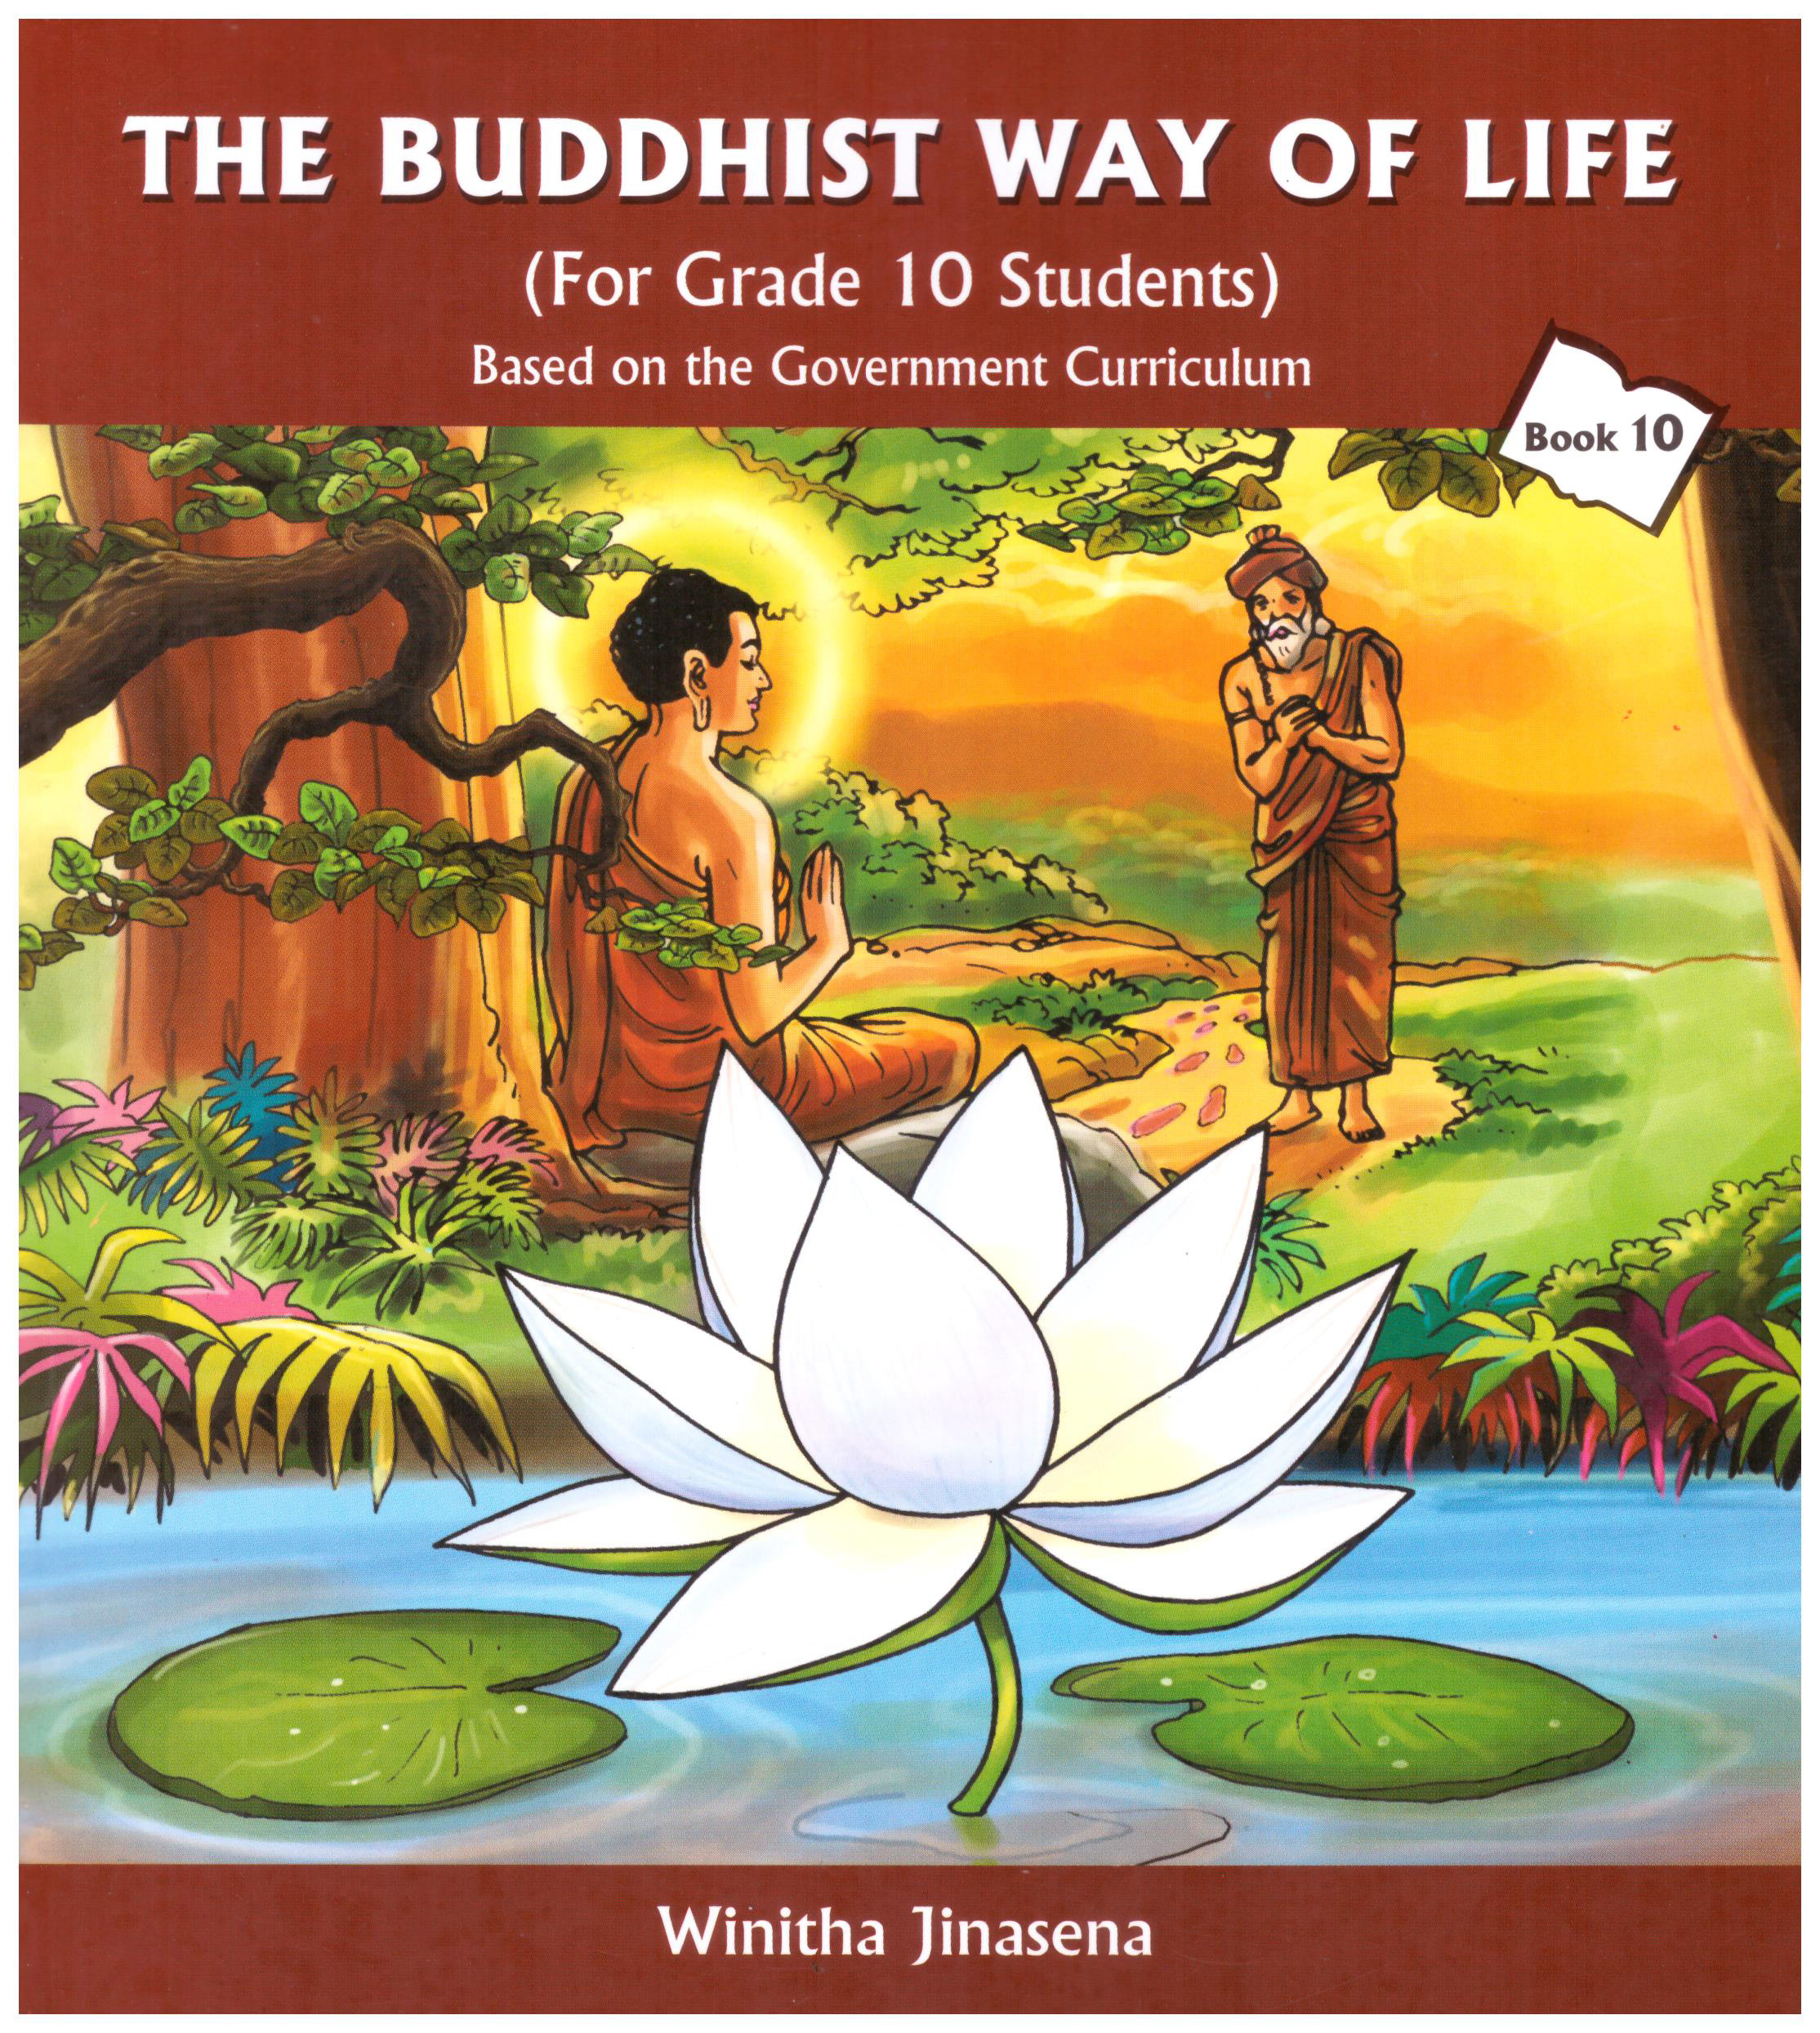 The Buddhist Way of Life Book 10